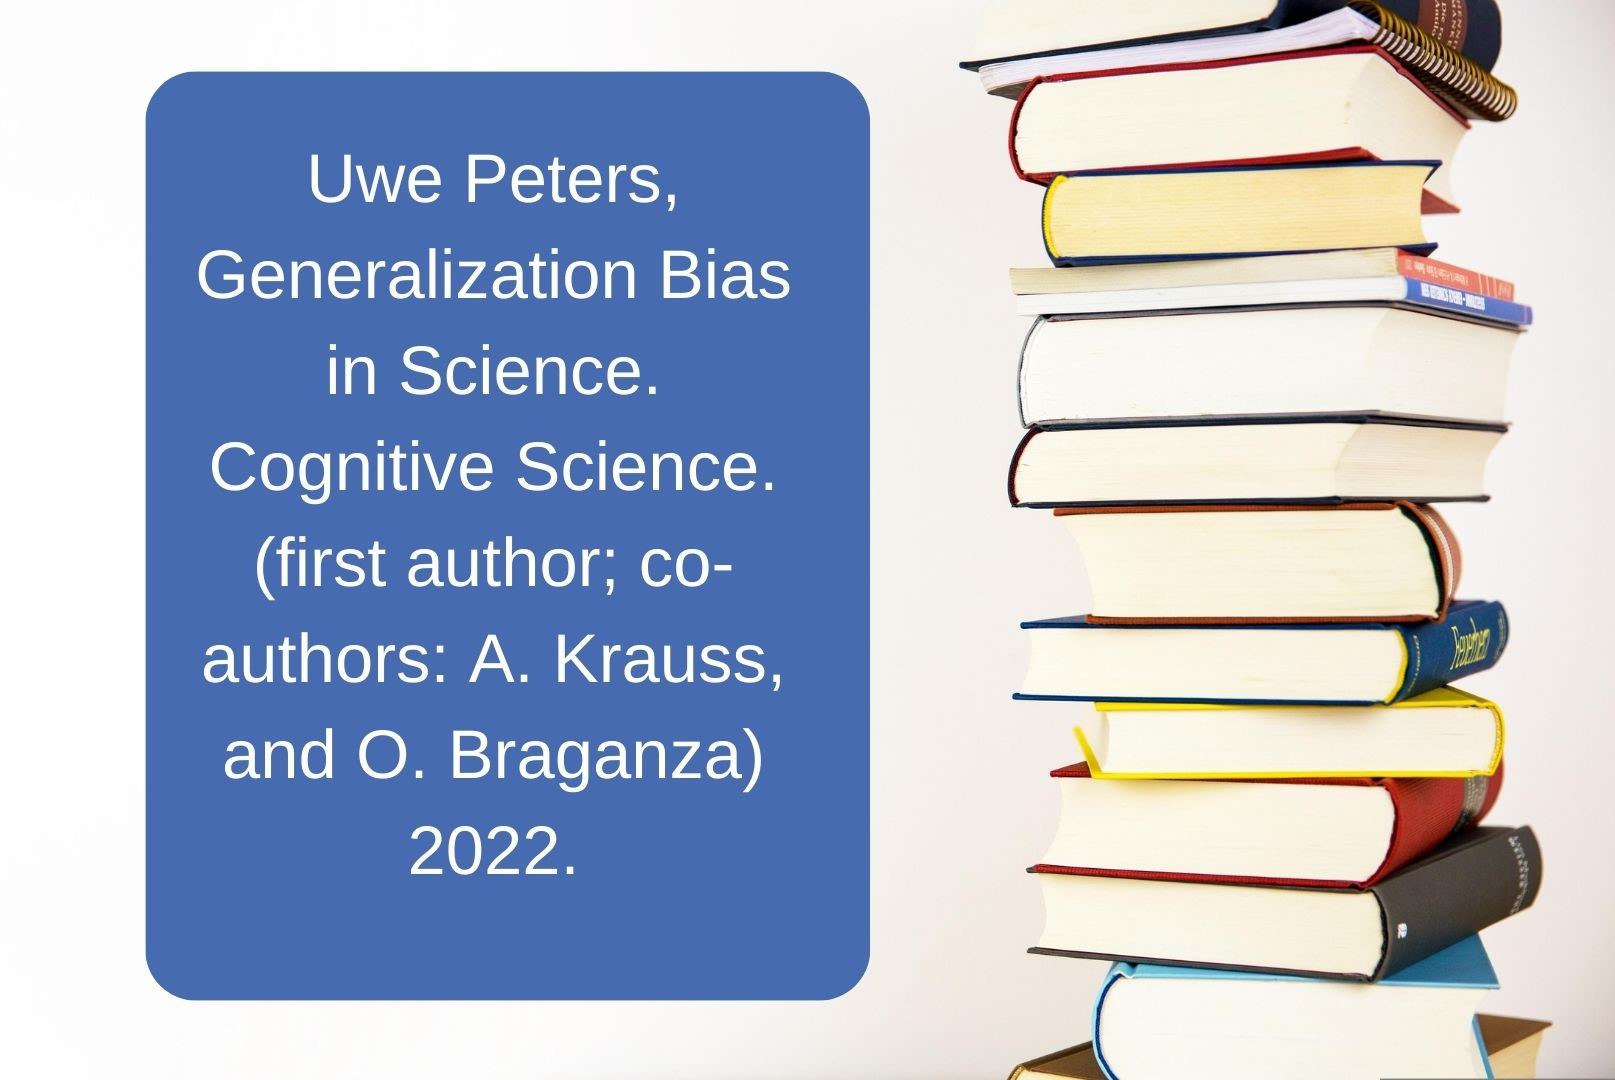 Uwe Peters, Generalization Bias in Science. Cognitive Science. (first author; co-authors A. Krauss, and O. Braganza) 2022..jpg